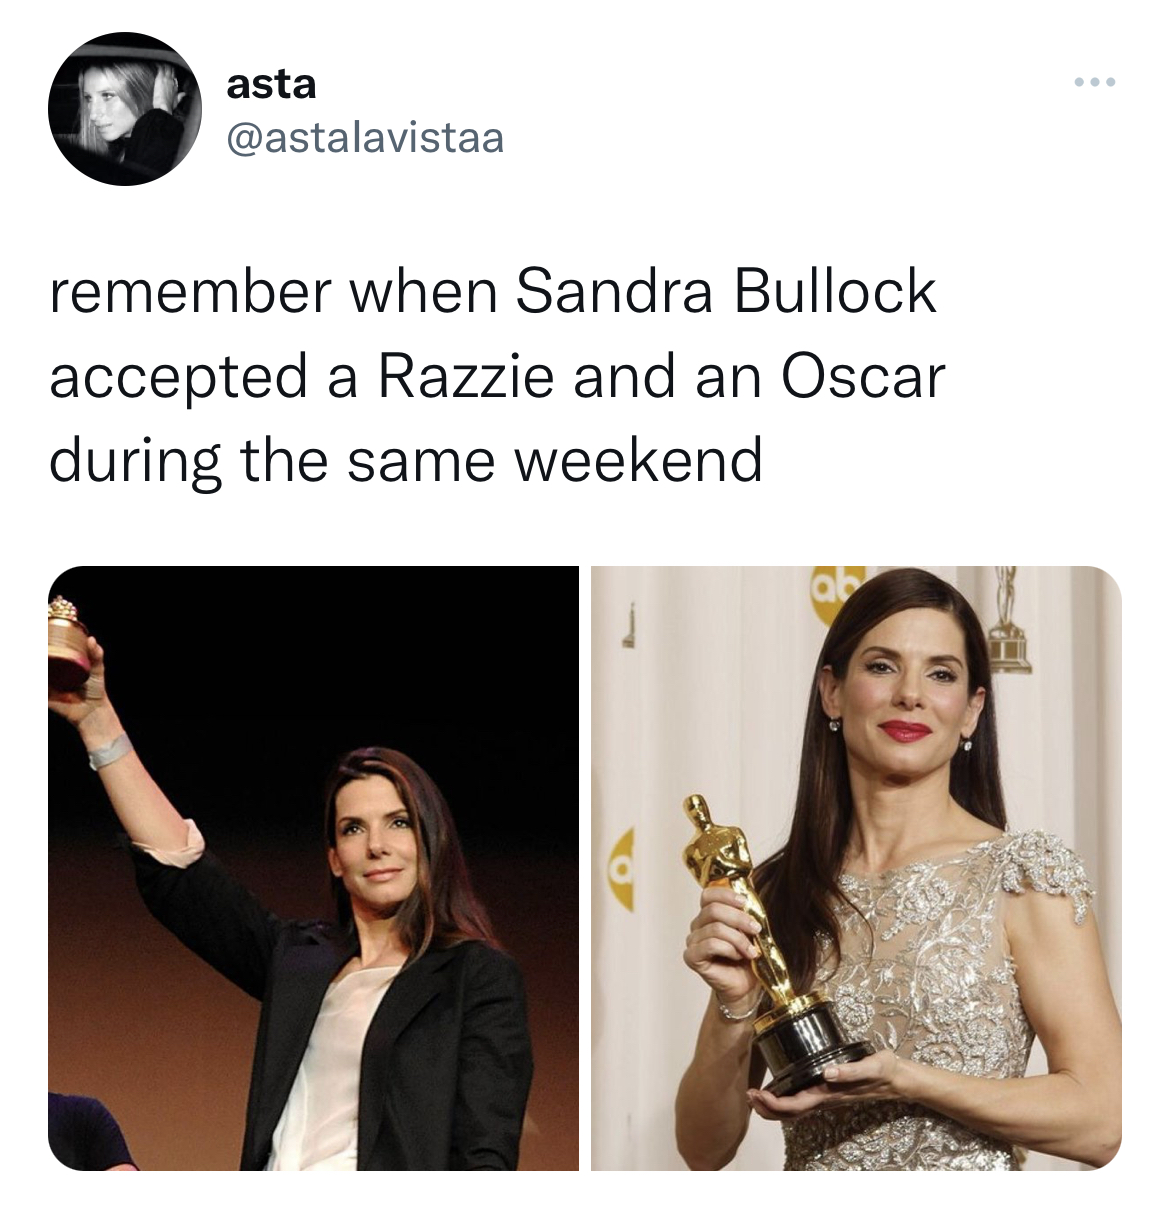 Tweets roasting celebs - sandra bullock razzie - asta remember when Sandra Bullock accepted a Razzie and an Oscar during the same weekend 11